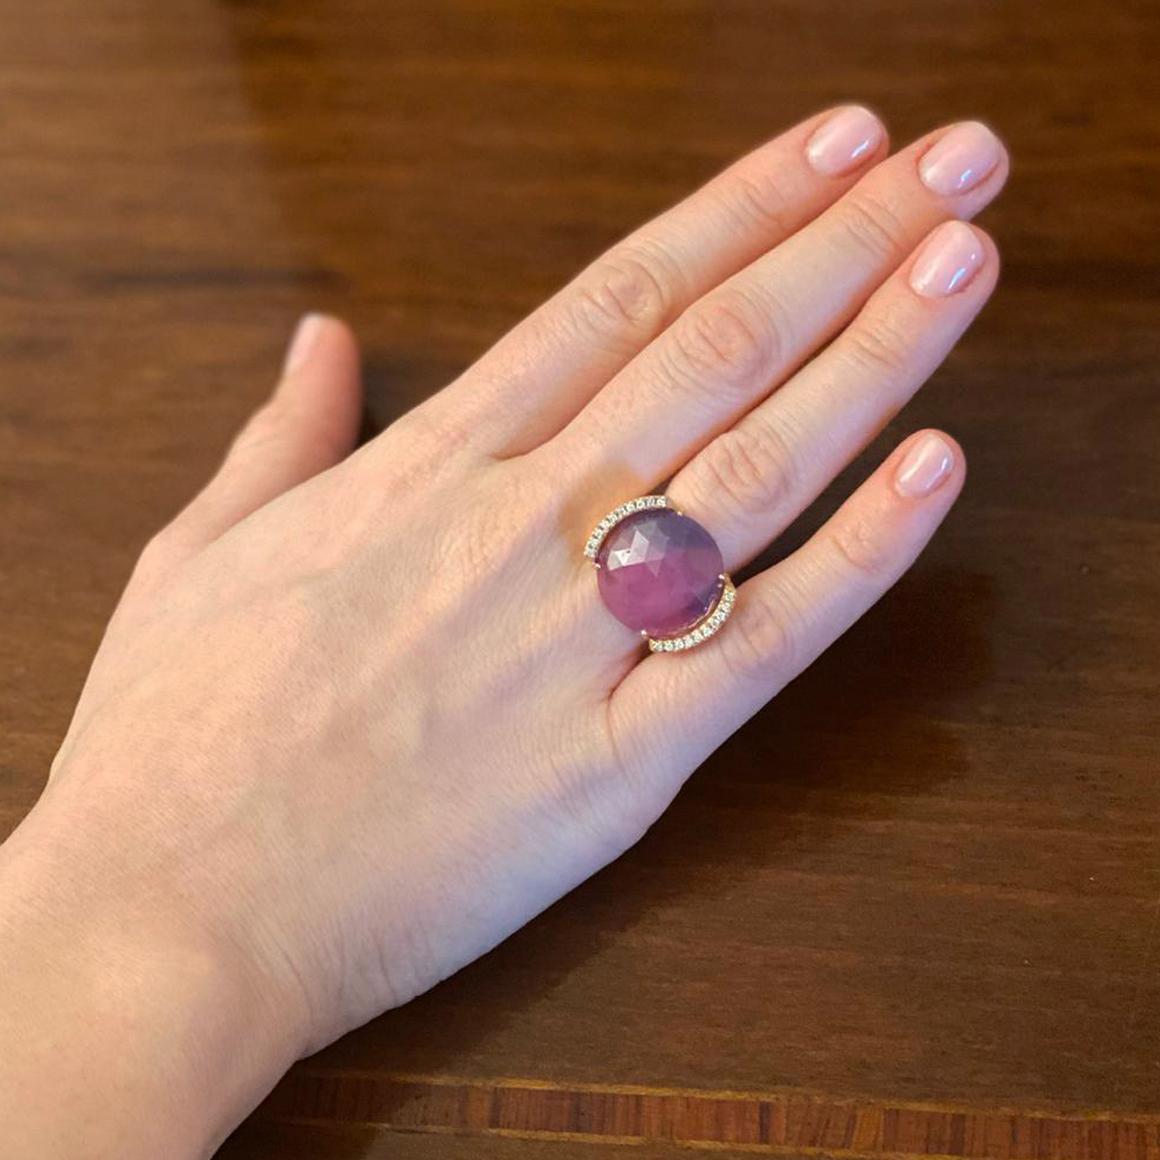  Ruby has always been seen as a talisman of passion, protection and prosperity.  Delicate shades make the stone unique .  Amazing cocktail ring with special root ruby stone, made in Italy by Stanoppi Jewellery since 1948.

Ring in 18k rose gold with